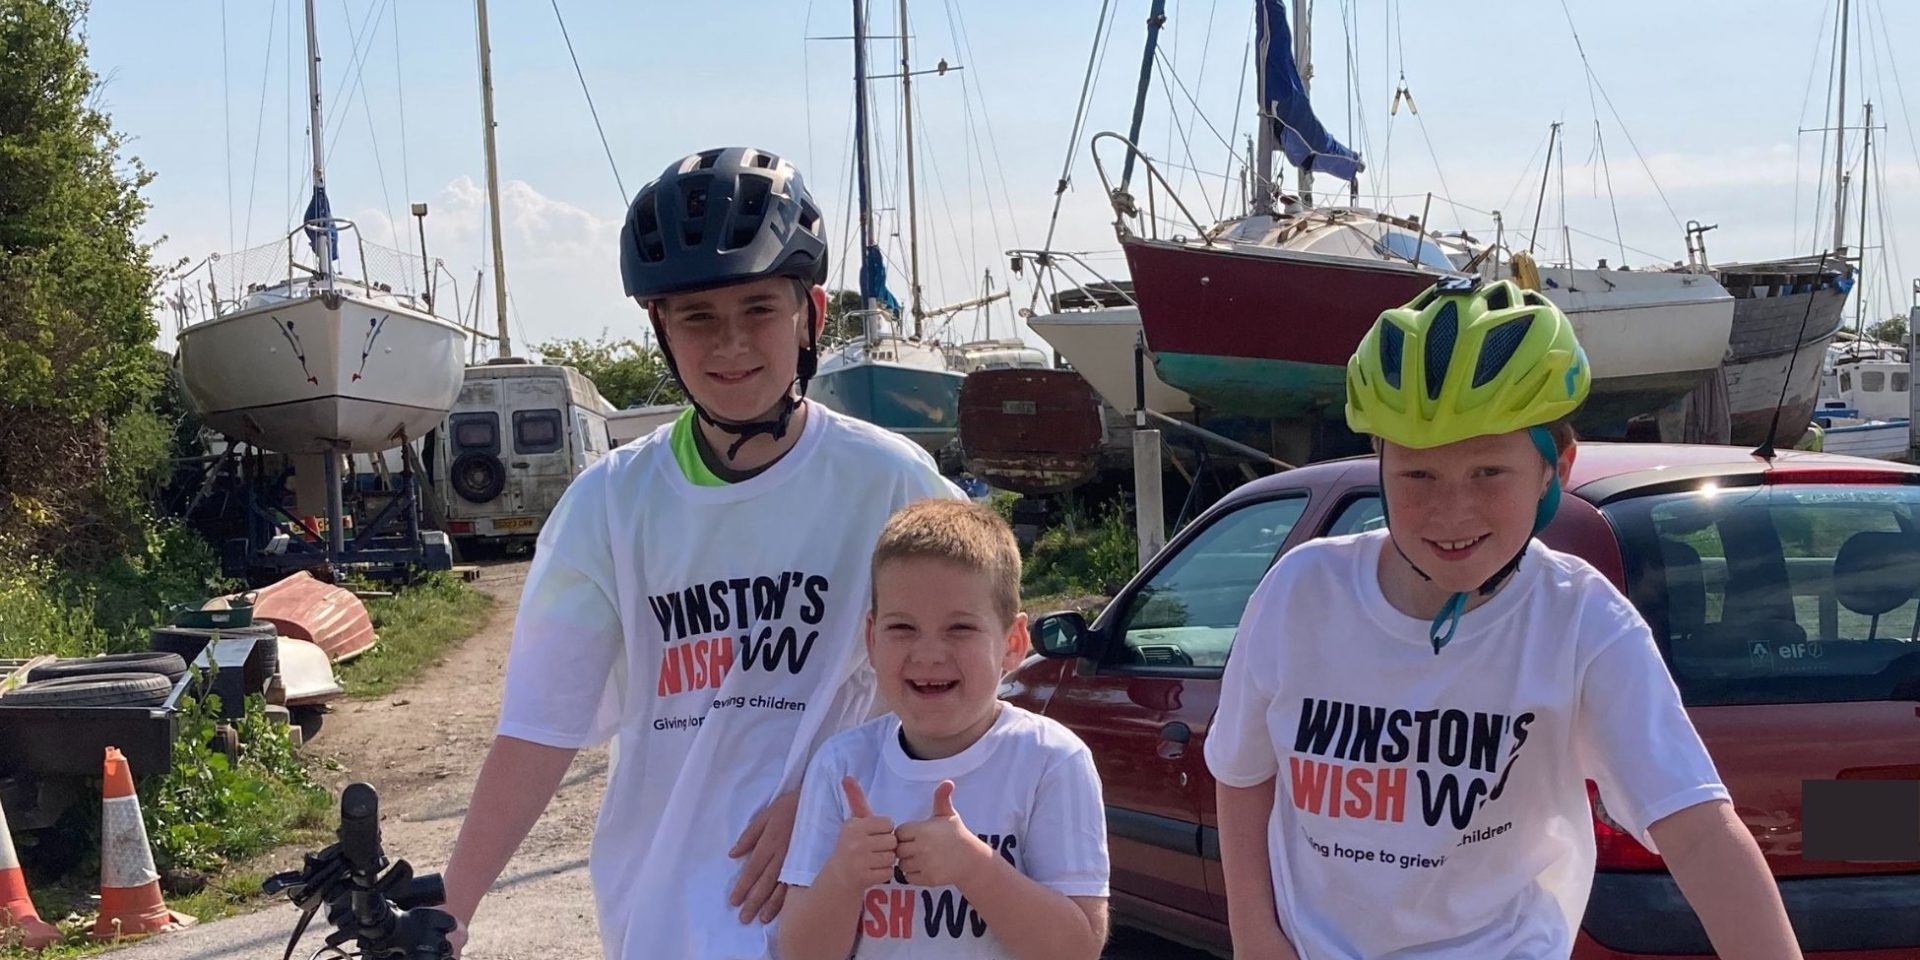 Three young boys in Winston's Wish t-shirts